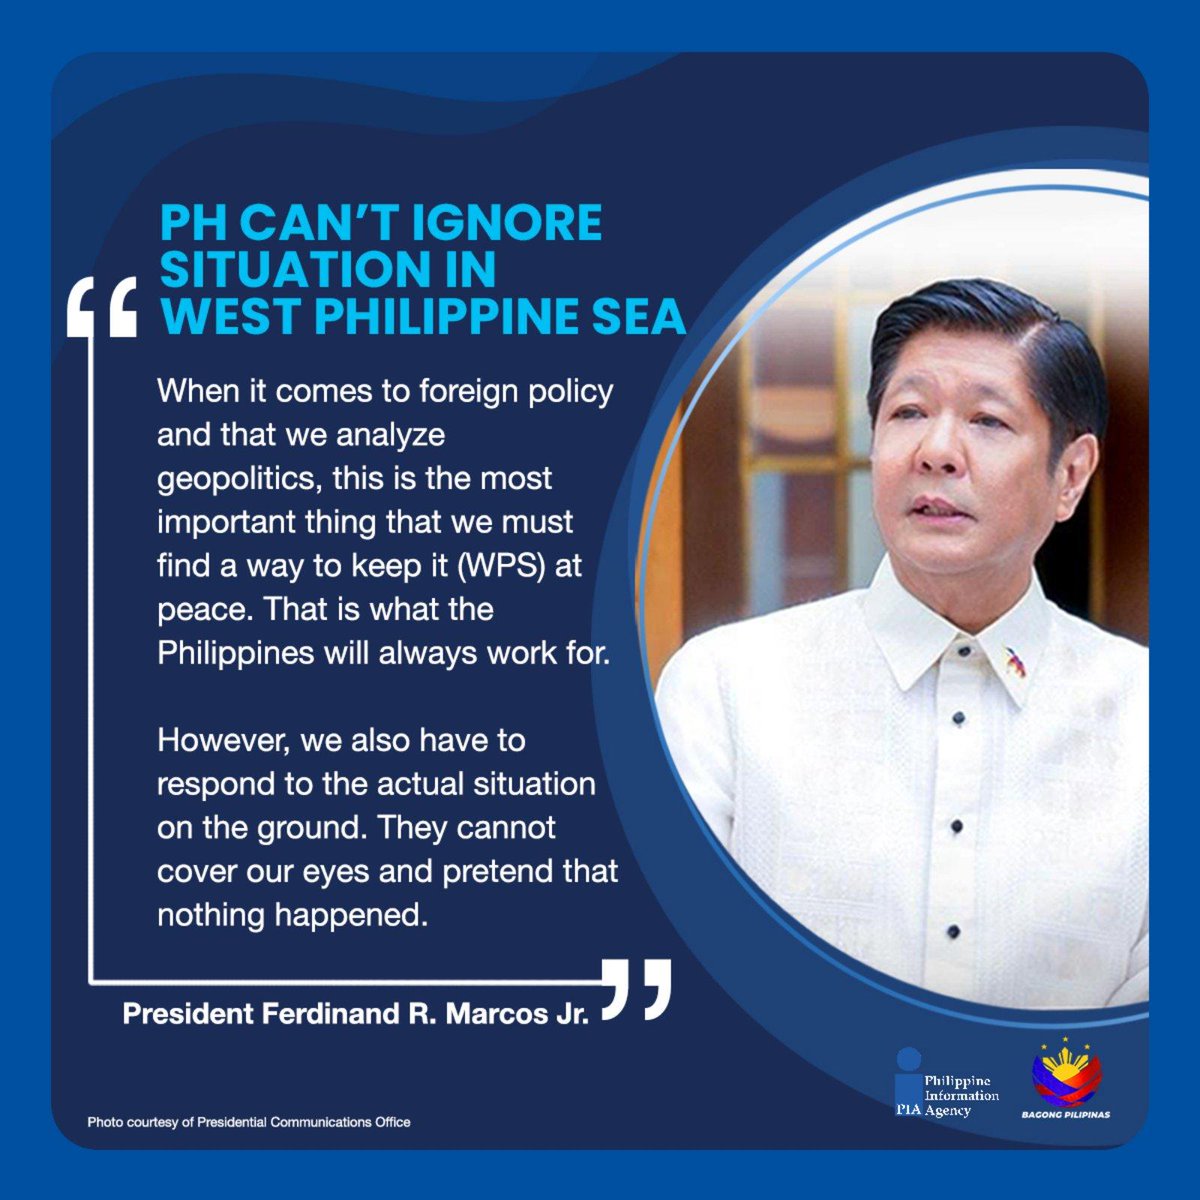 The Philippines can’t ignore what is happening in the West Philippine Sea, President Ferdinand R. Marcos Jr. said as he stressed the need to find a way to keep regional peace and to respond to the actual situation. Read here: pia.gov.ph/press-releases…